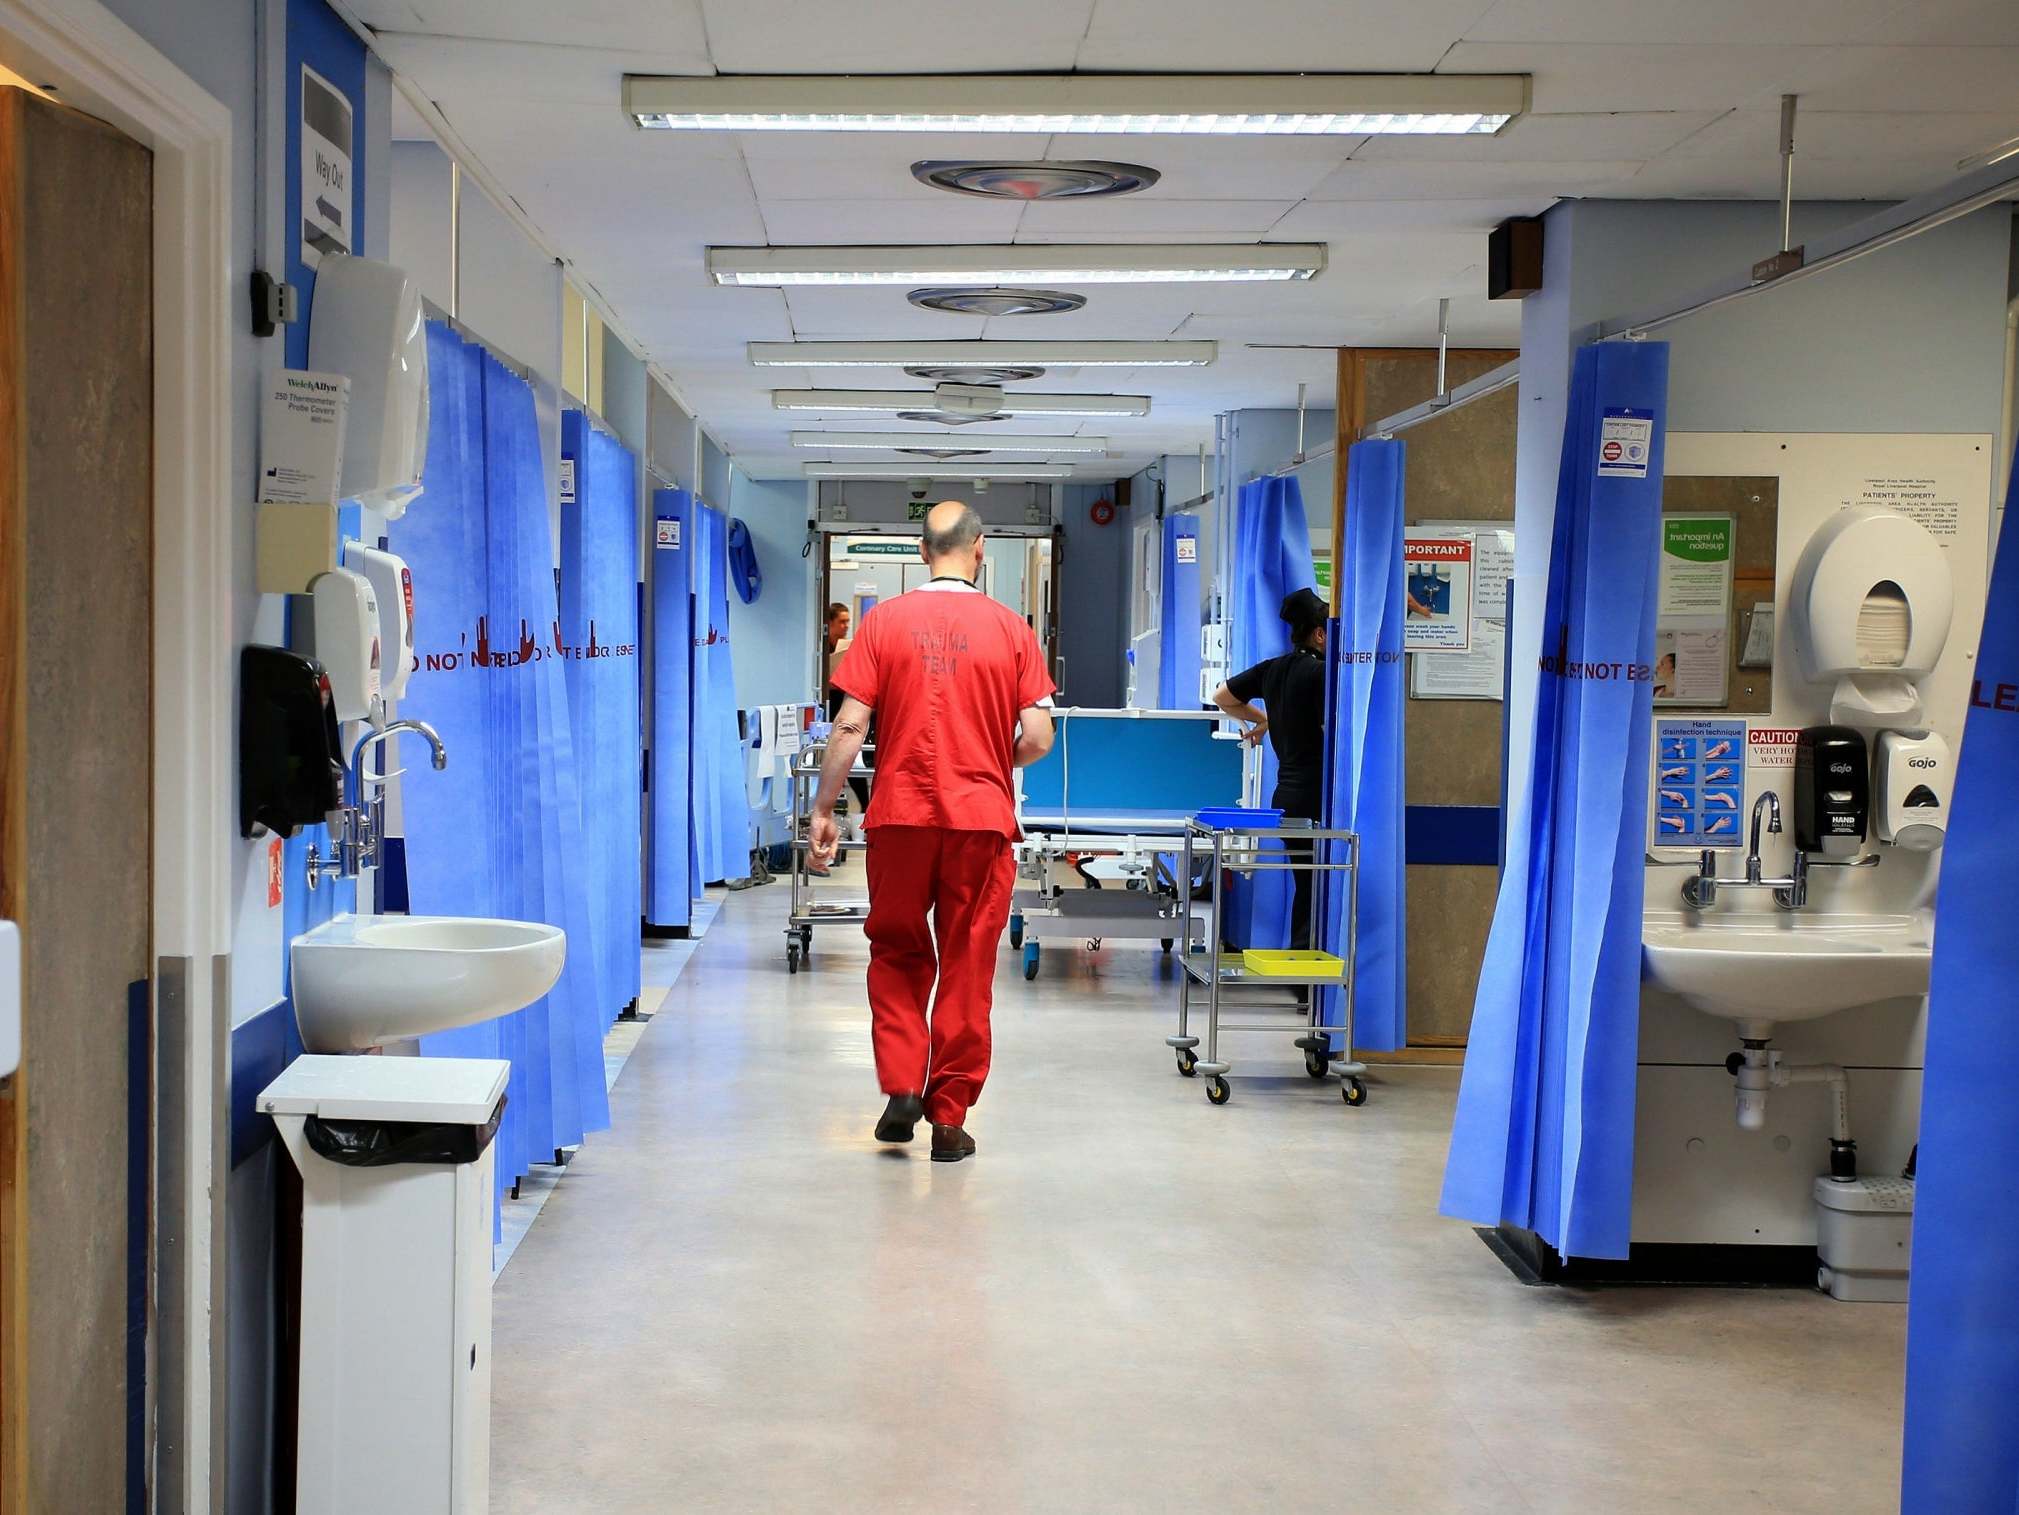 Changes to pensions in 2016 have been linked to rising NHS waiting times